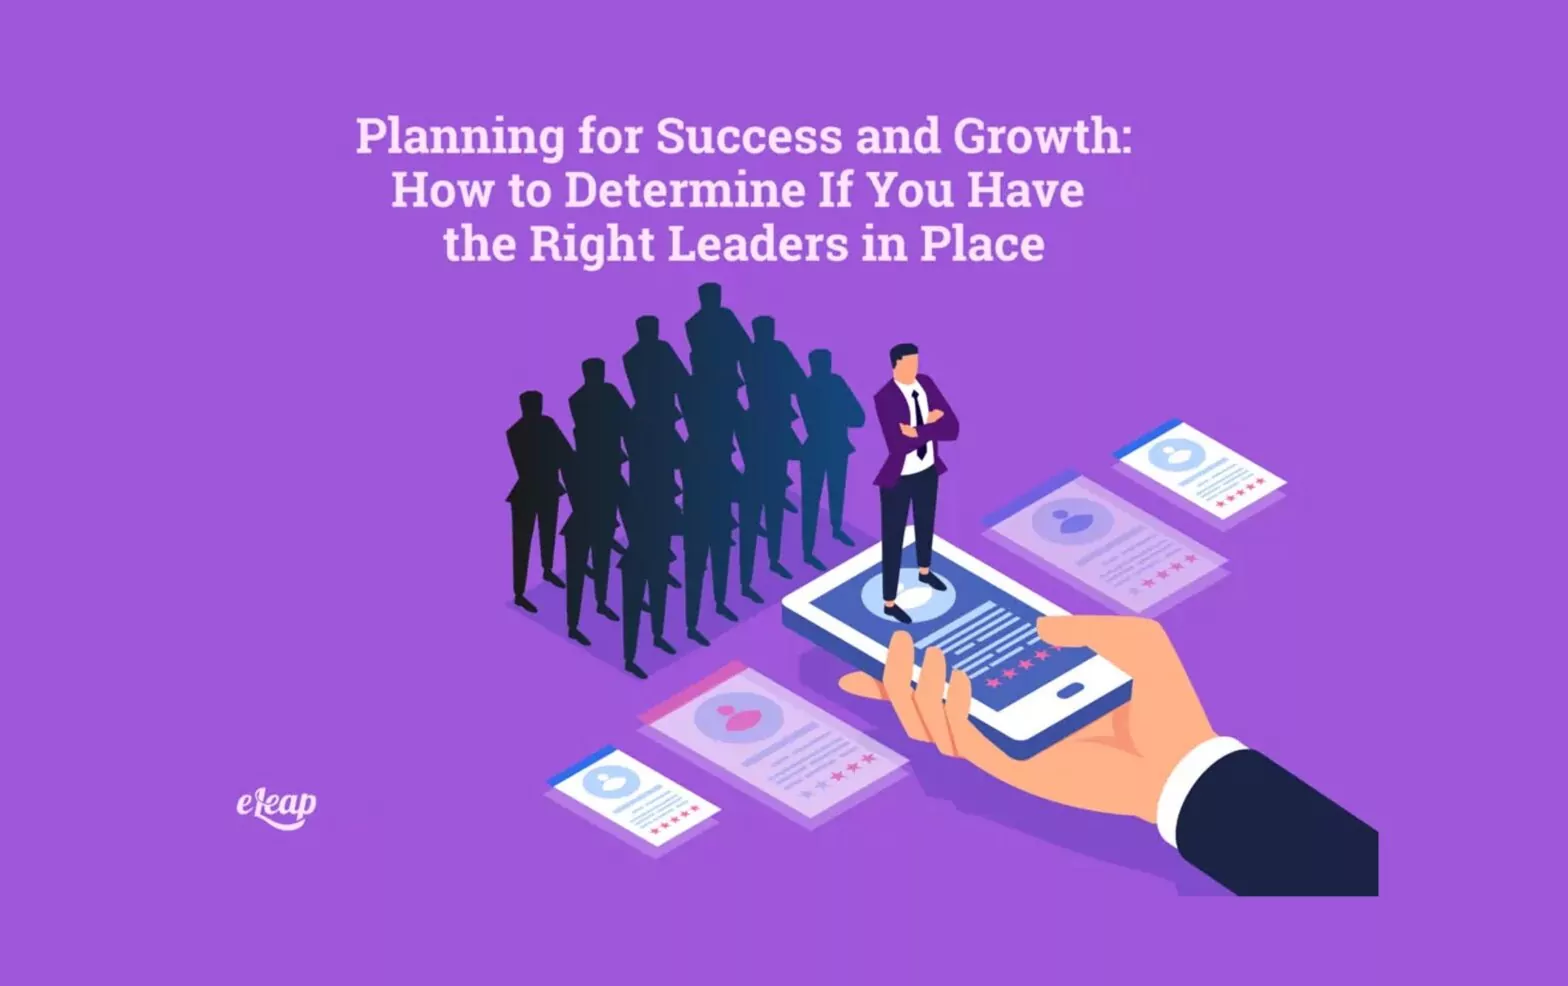 Planning for Success and Growth: How to Determine If You Have the Right Leaders in Place